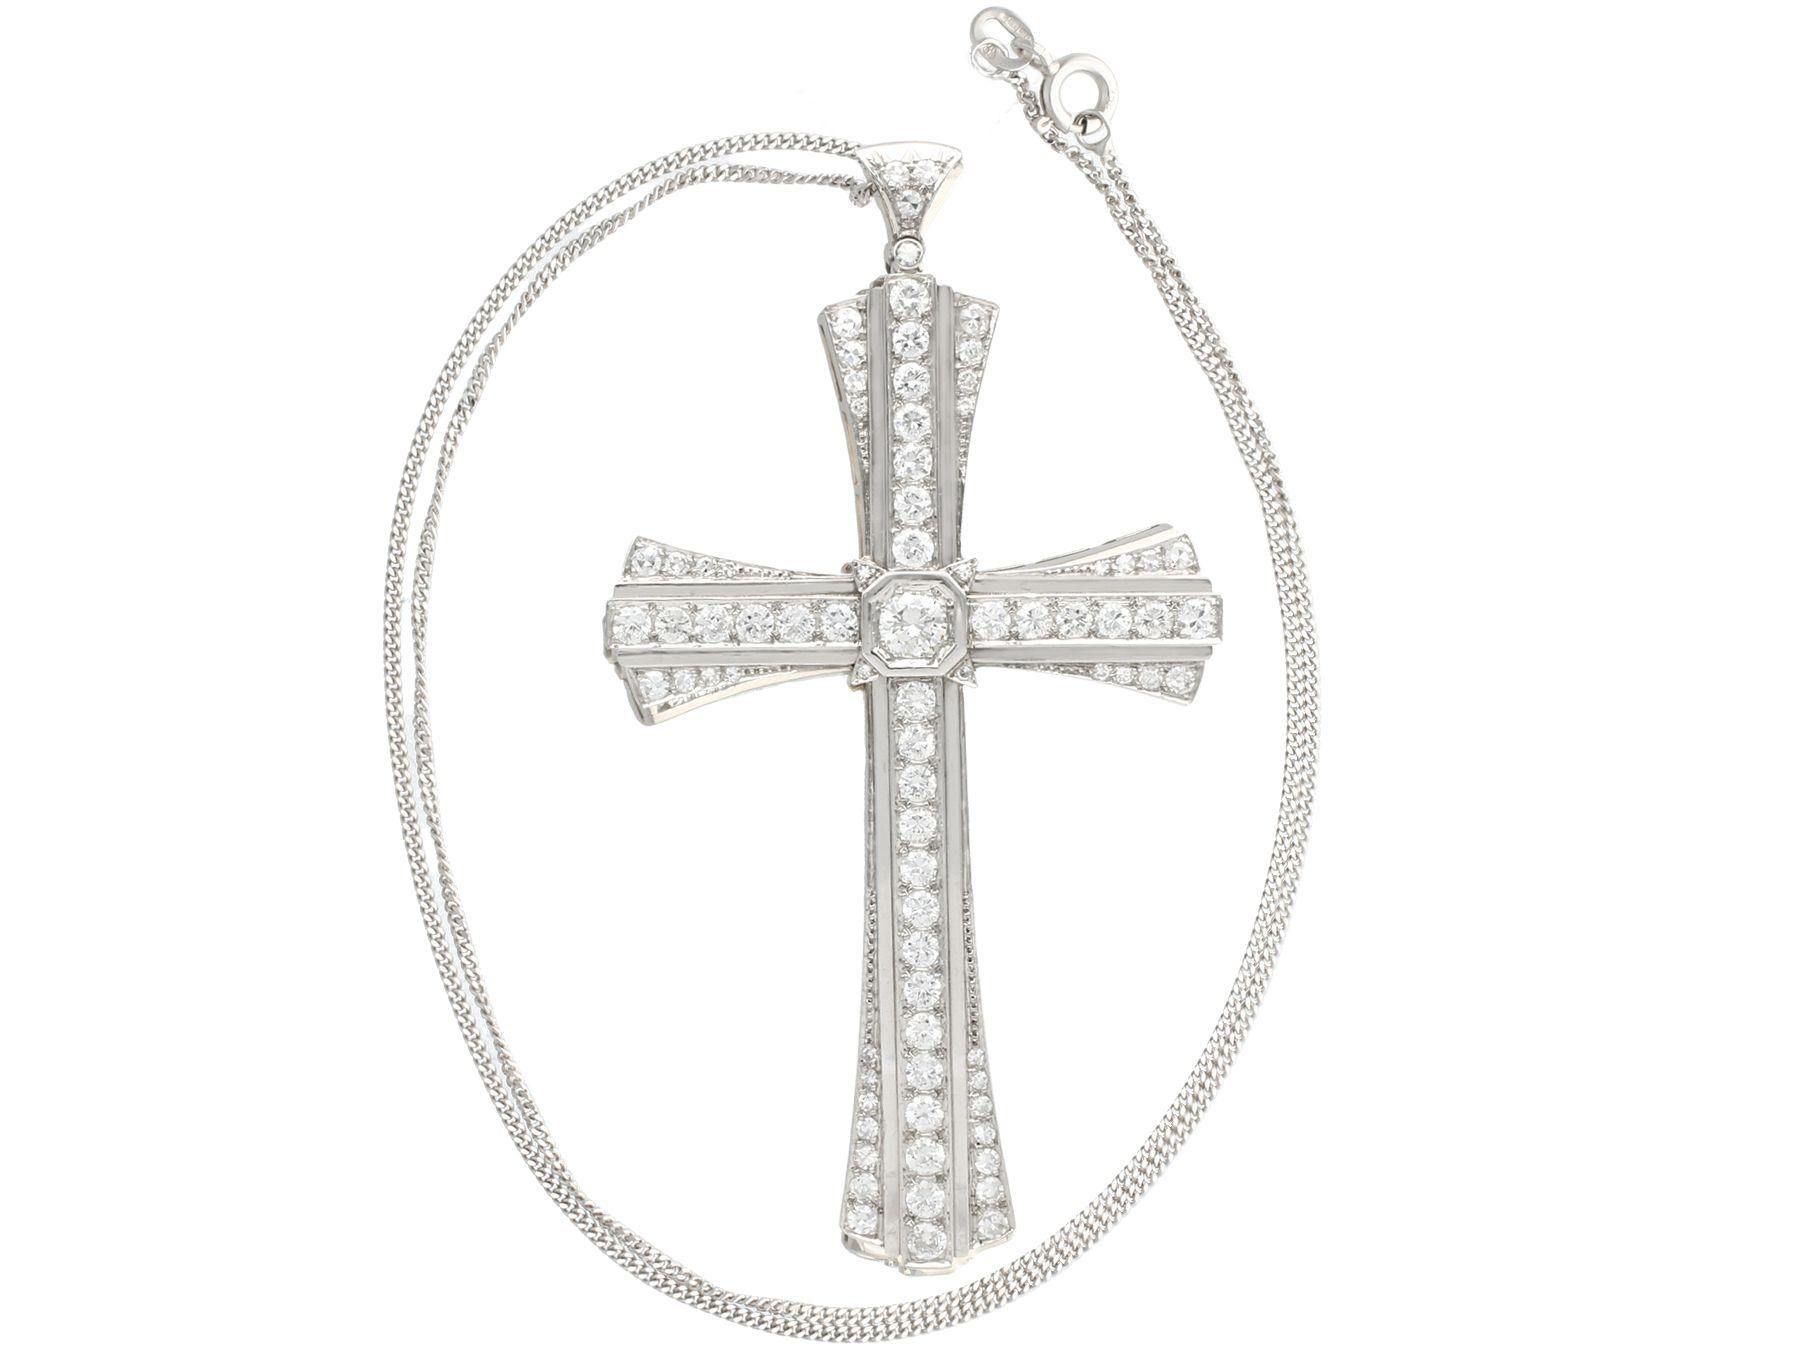 A stunning and large antique 1930s 4.31 carat diamond and platinum cross design pendant; part of our diverse antique estate jewelry collections.

This stunning, fine and impressive antique diamond pendant has been crafted in platinum.

This antique